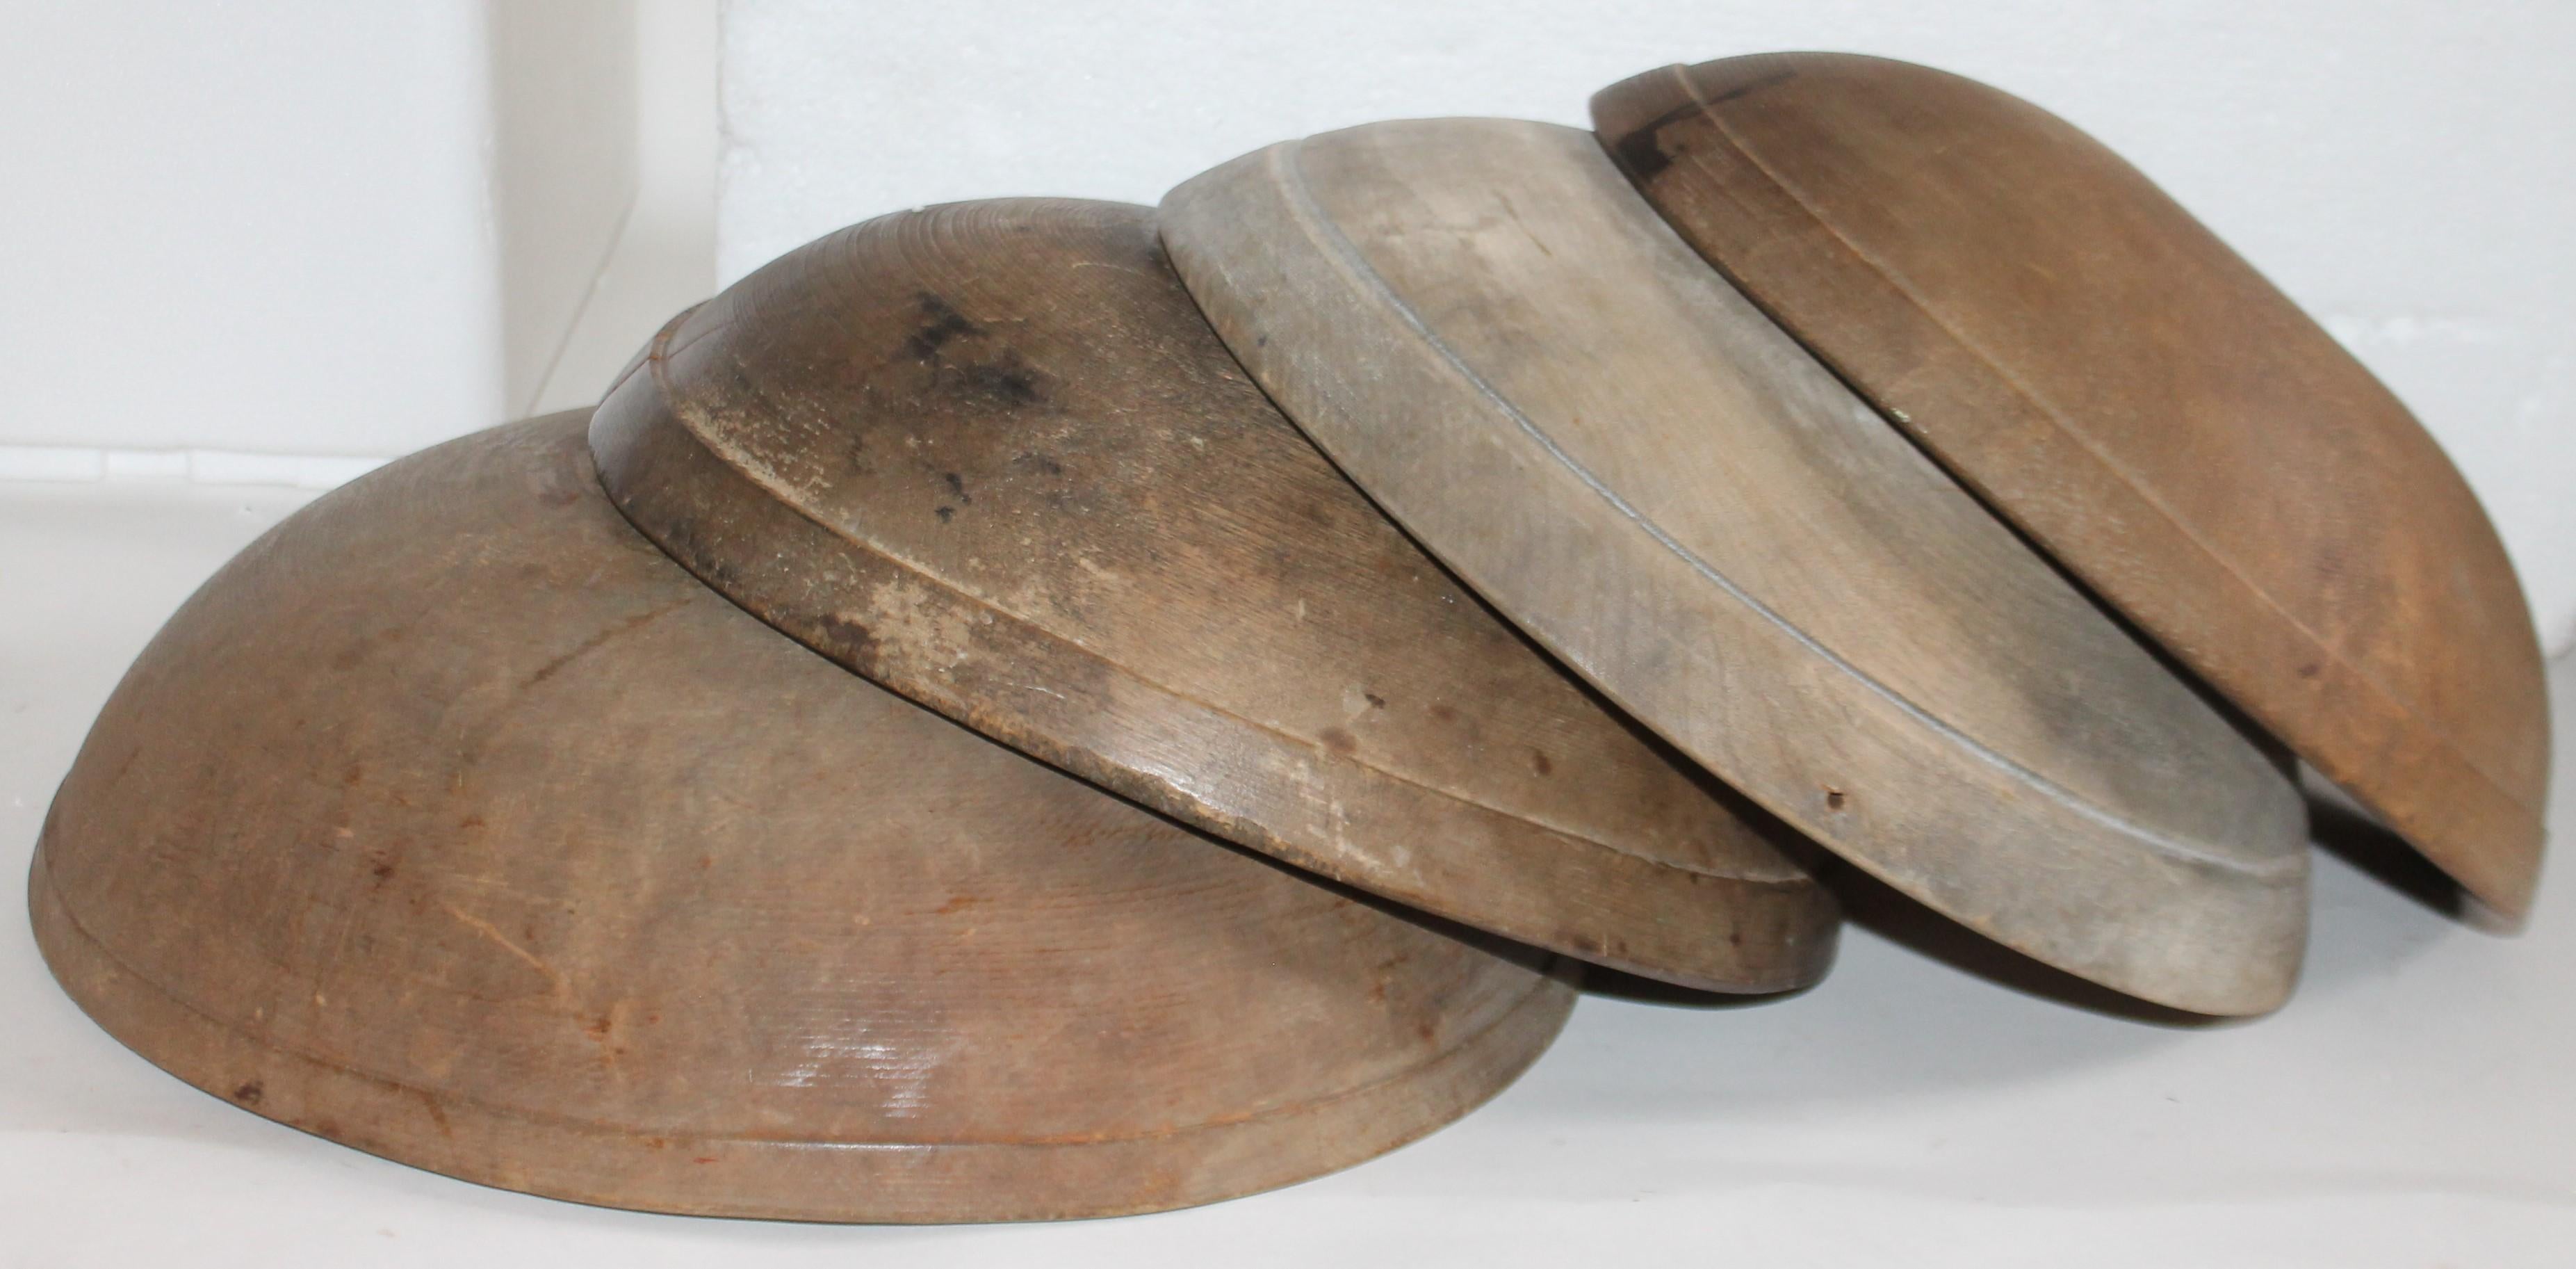 Collection of four butter bowls in good condition from Pennsylvania.
Smallest bowl measures:
12 x 3
Medium bowls measure:
13 x 3
Largest oval bowl measures:
14 x 15 x 4.